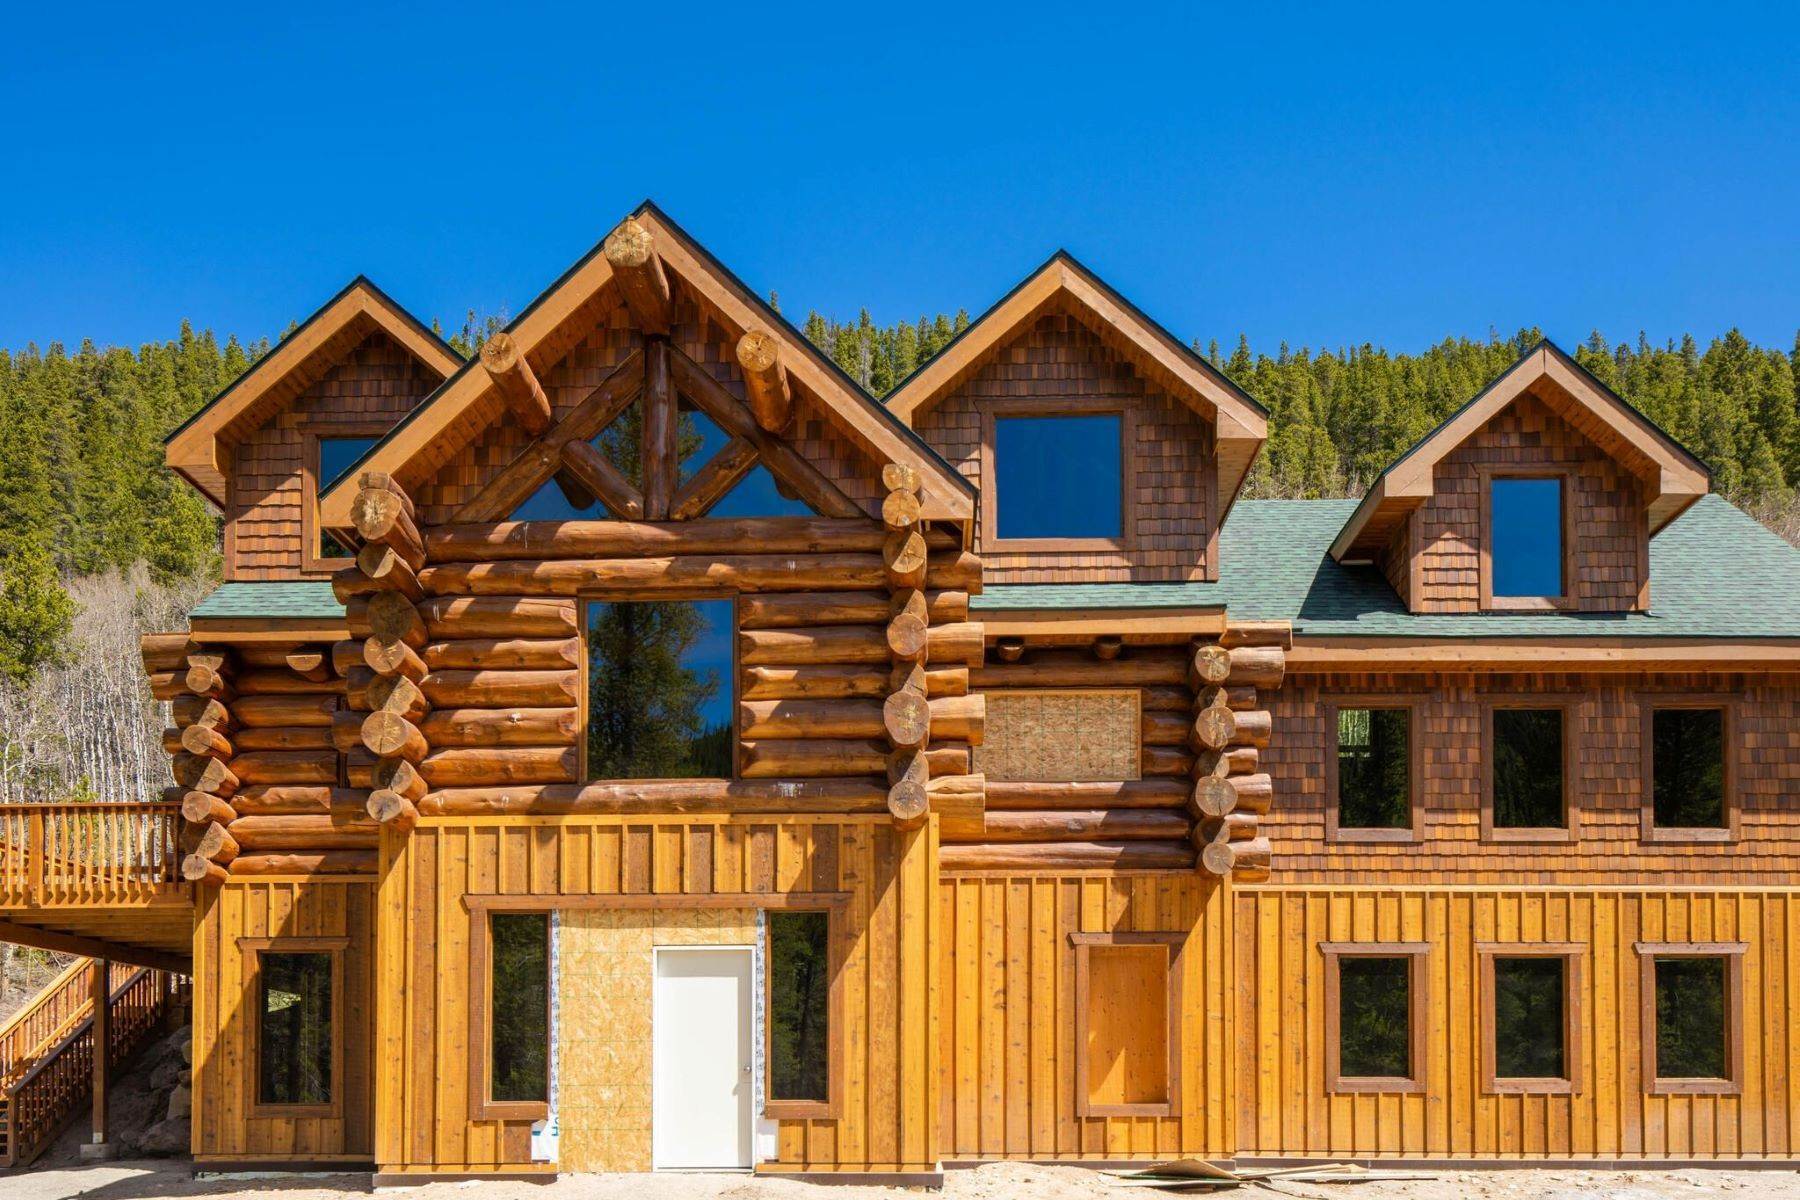 Single Family Homes for Active at Brand New Construction! 733 Rainbow Road Idaho Springs, Colorado 80452 United States